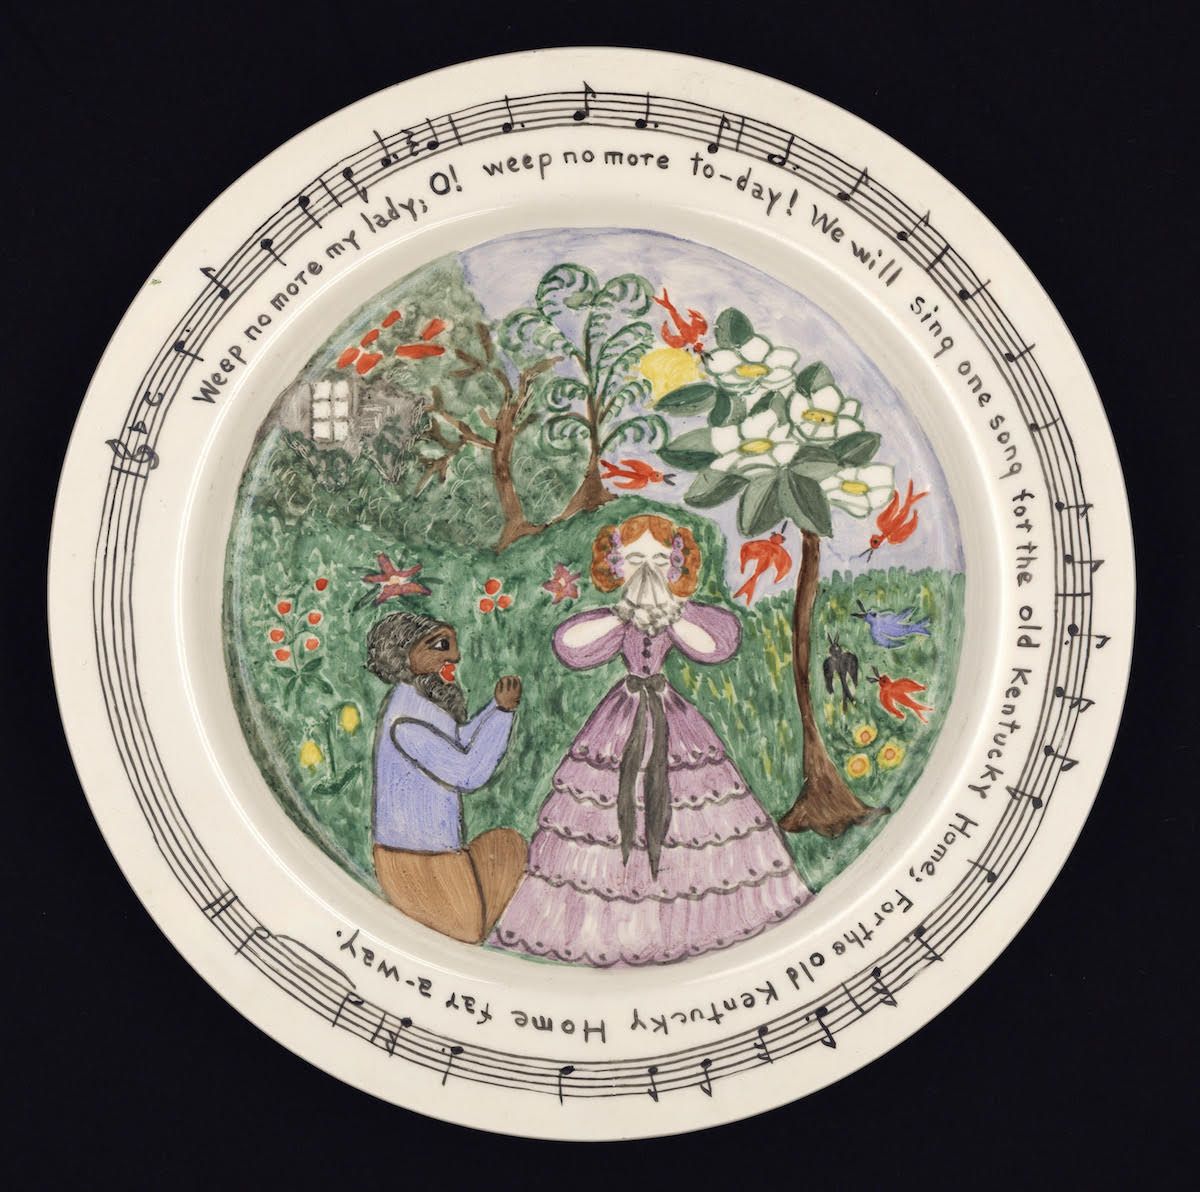 One of a series of hand-painted plates illustrating Foster melodies by Richmond, VA, artist Willoughby Ions. A white woman in antebellum dress weeps as a Black man kneels at her feet, pleading with her to stop crying. The lyrics of the song ring the plate.